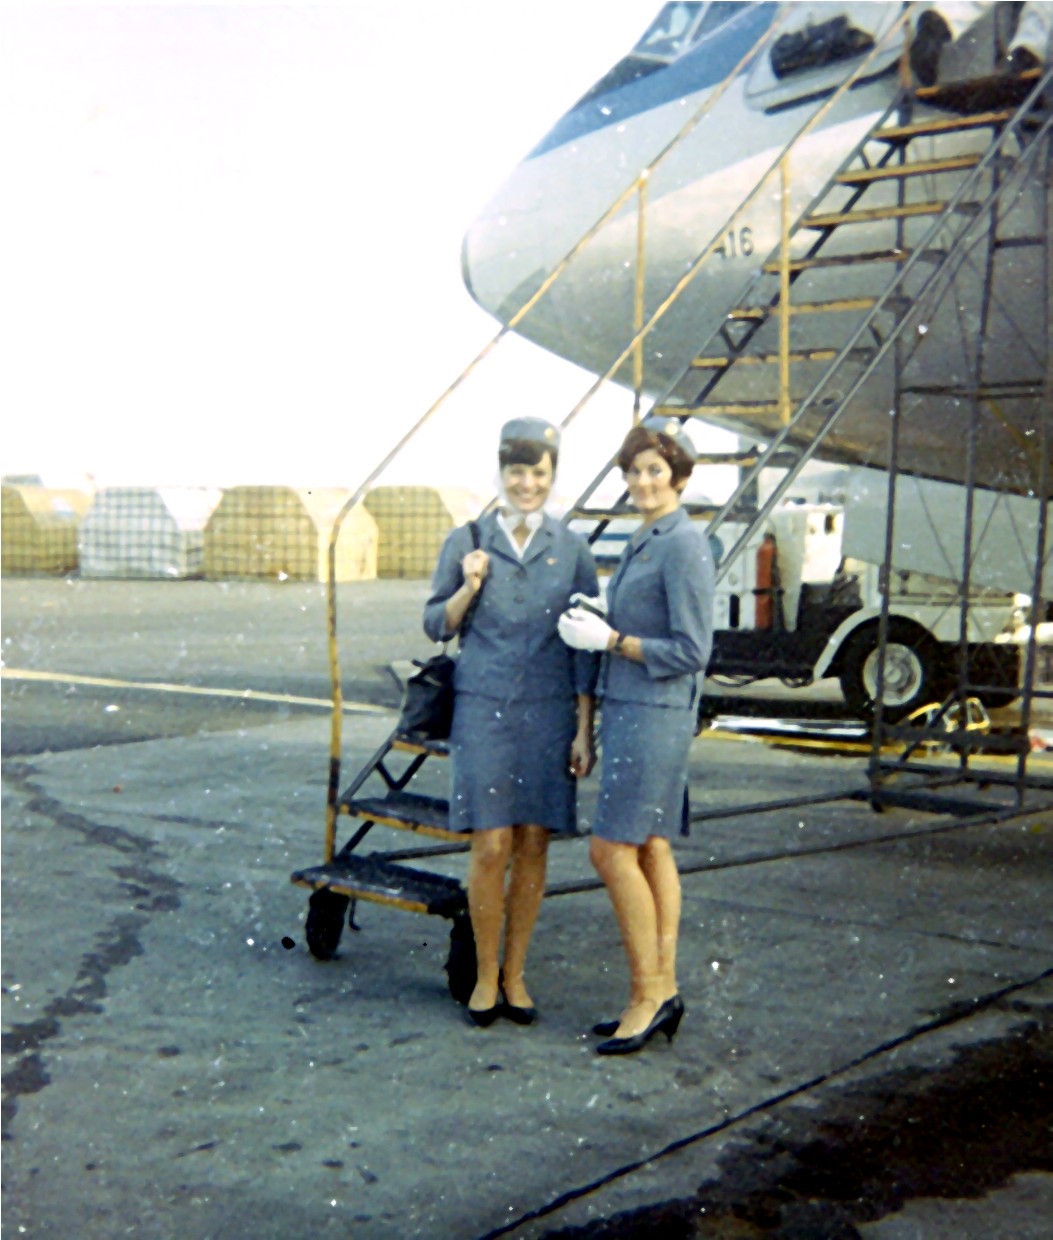 1968 Edwards Air Force Base California, Barbara Yost, left, and Christine Buys, right, ready to board a Military Airlfit Command troop transport flight to Vietnam aboard a Pan Am Boeing 707 N416PA Clipper Paul Jones.